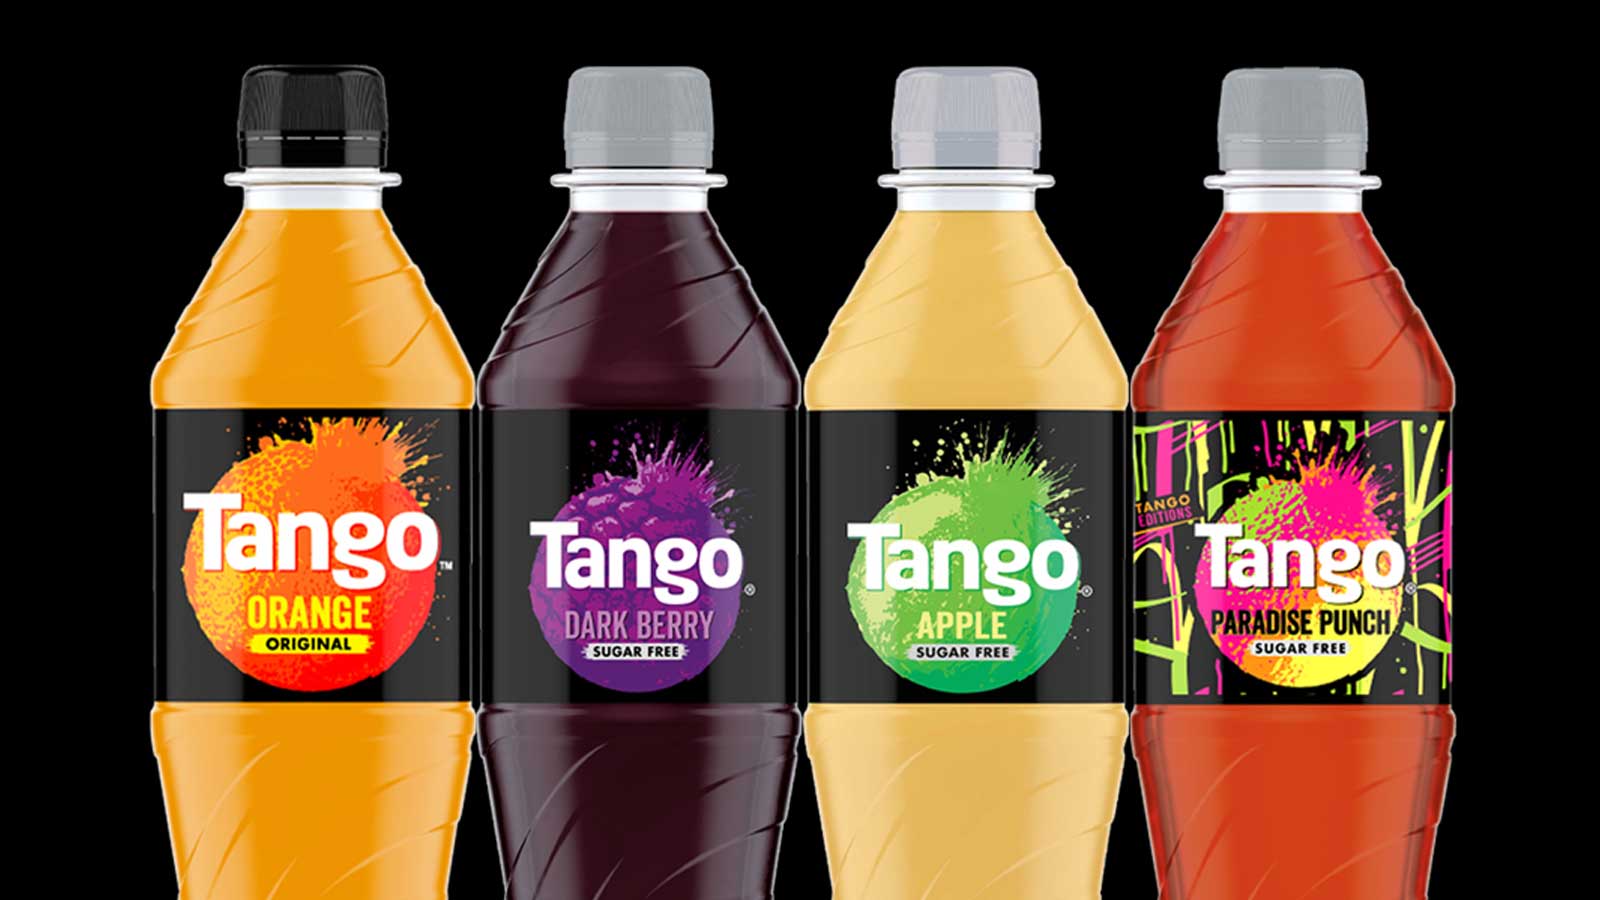 Flying in with a distinctive taste and a disruptive attitude Malta is getting Tango’d  